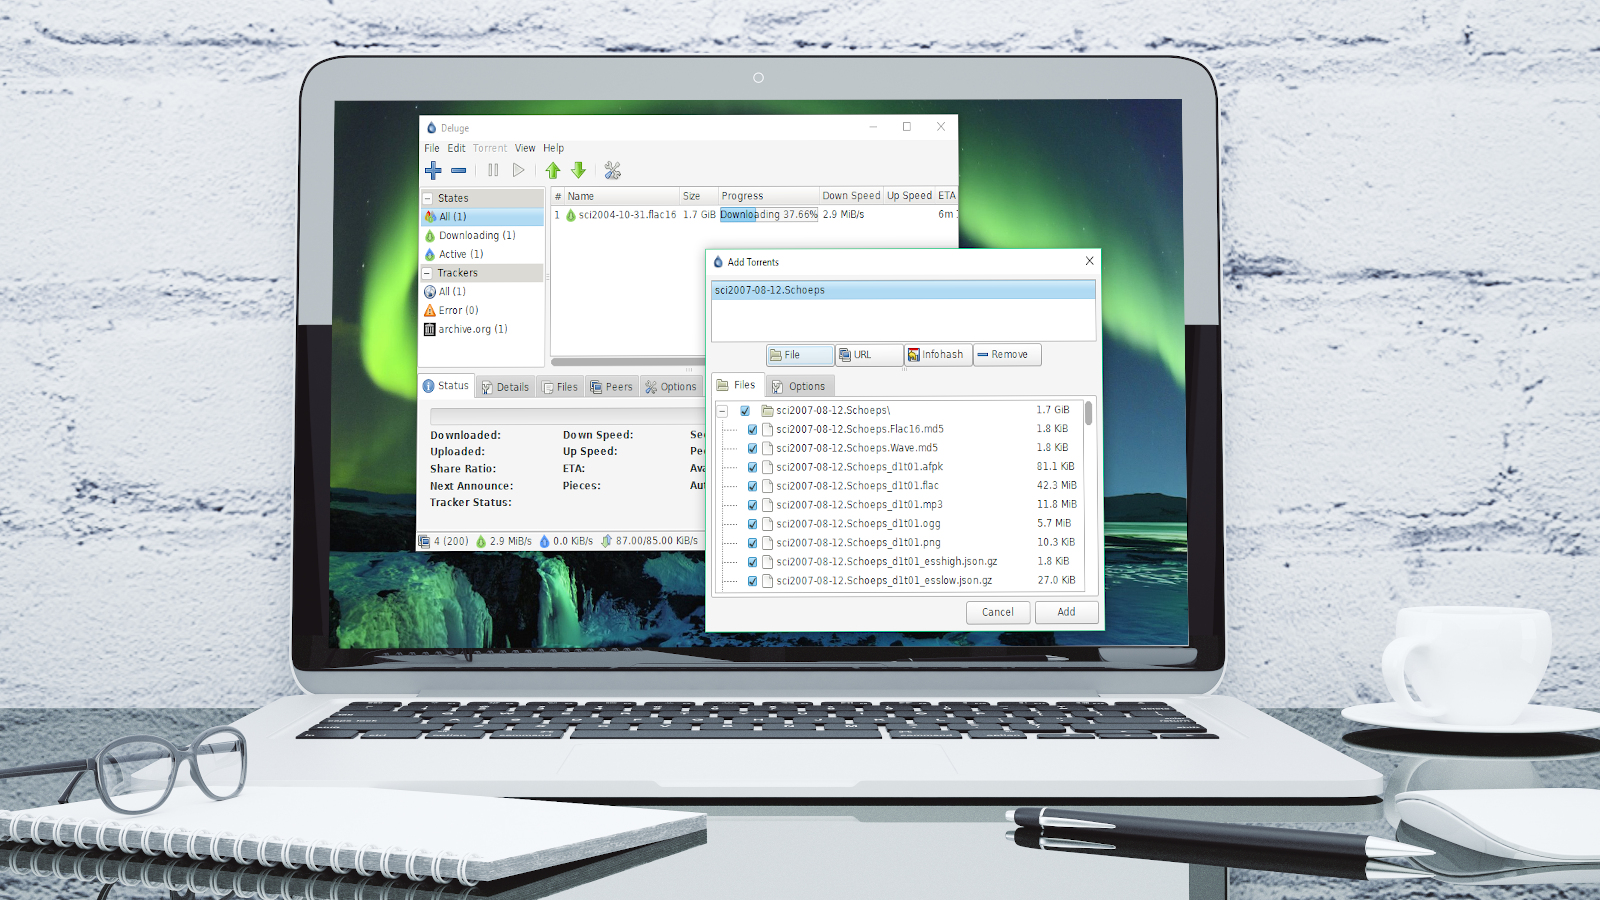 which torrent client is the best for mac